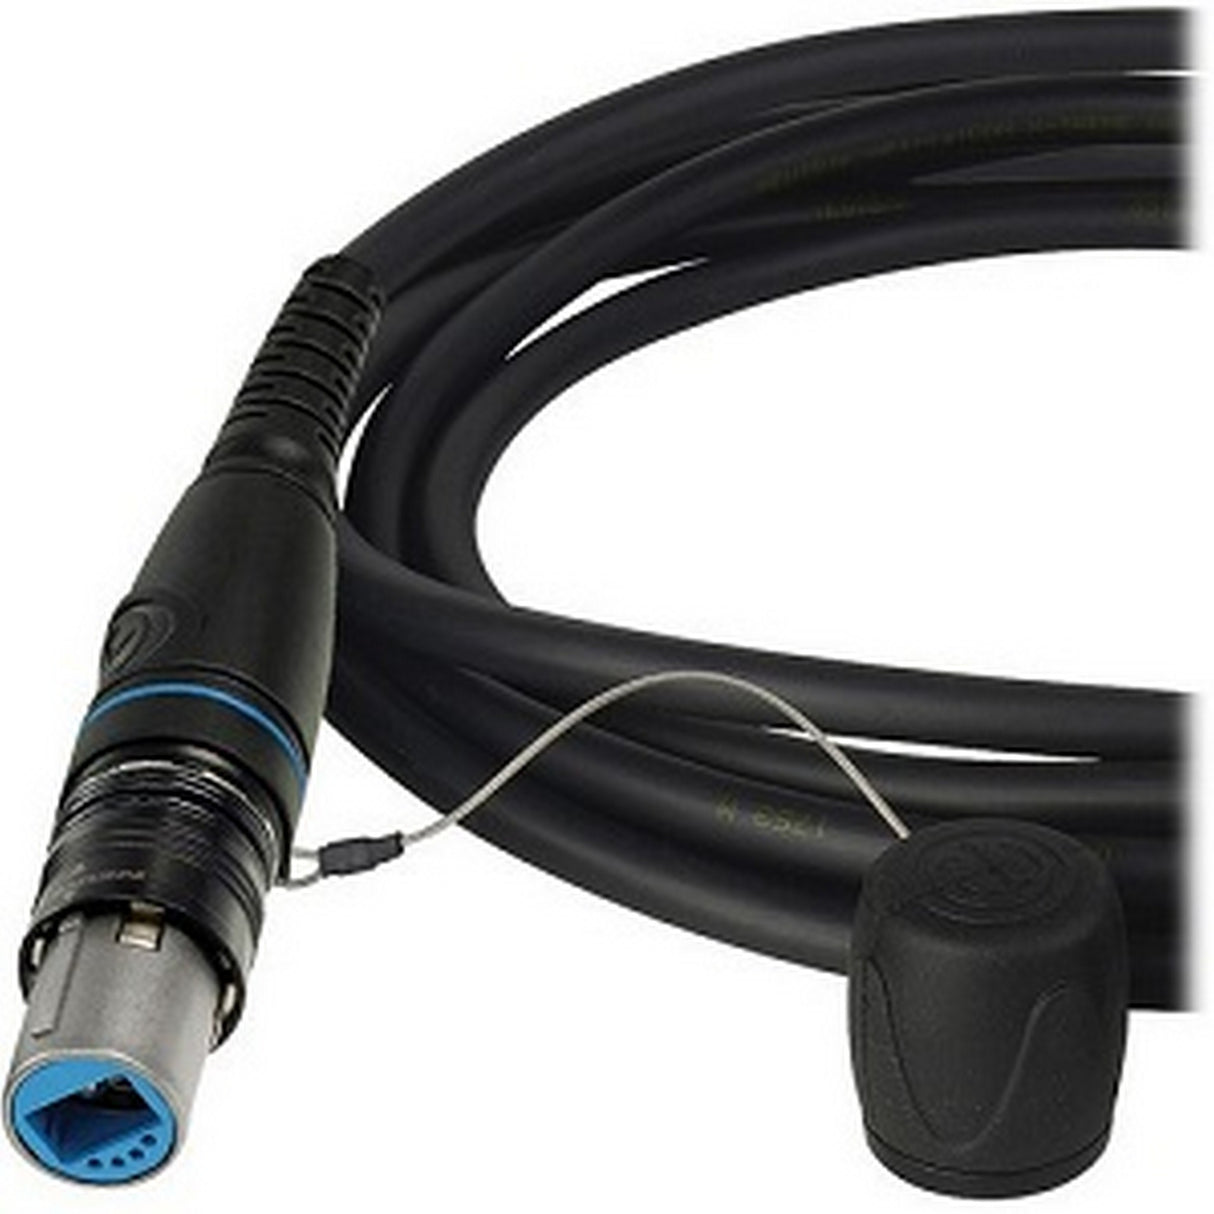 JVC VCFSH016NMC SMPTE Hybrid Fiber Cable with opticalCON Connectors, 16-Meters